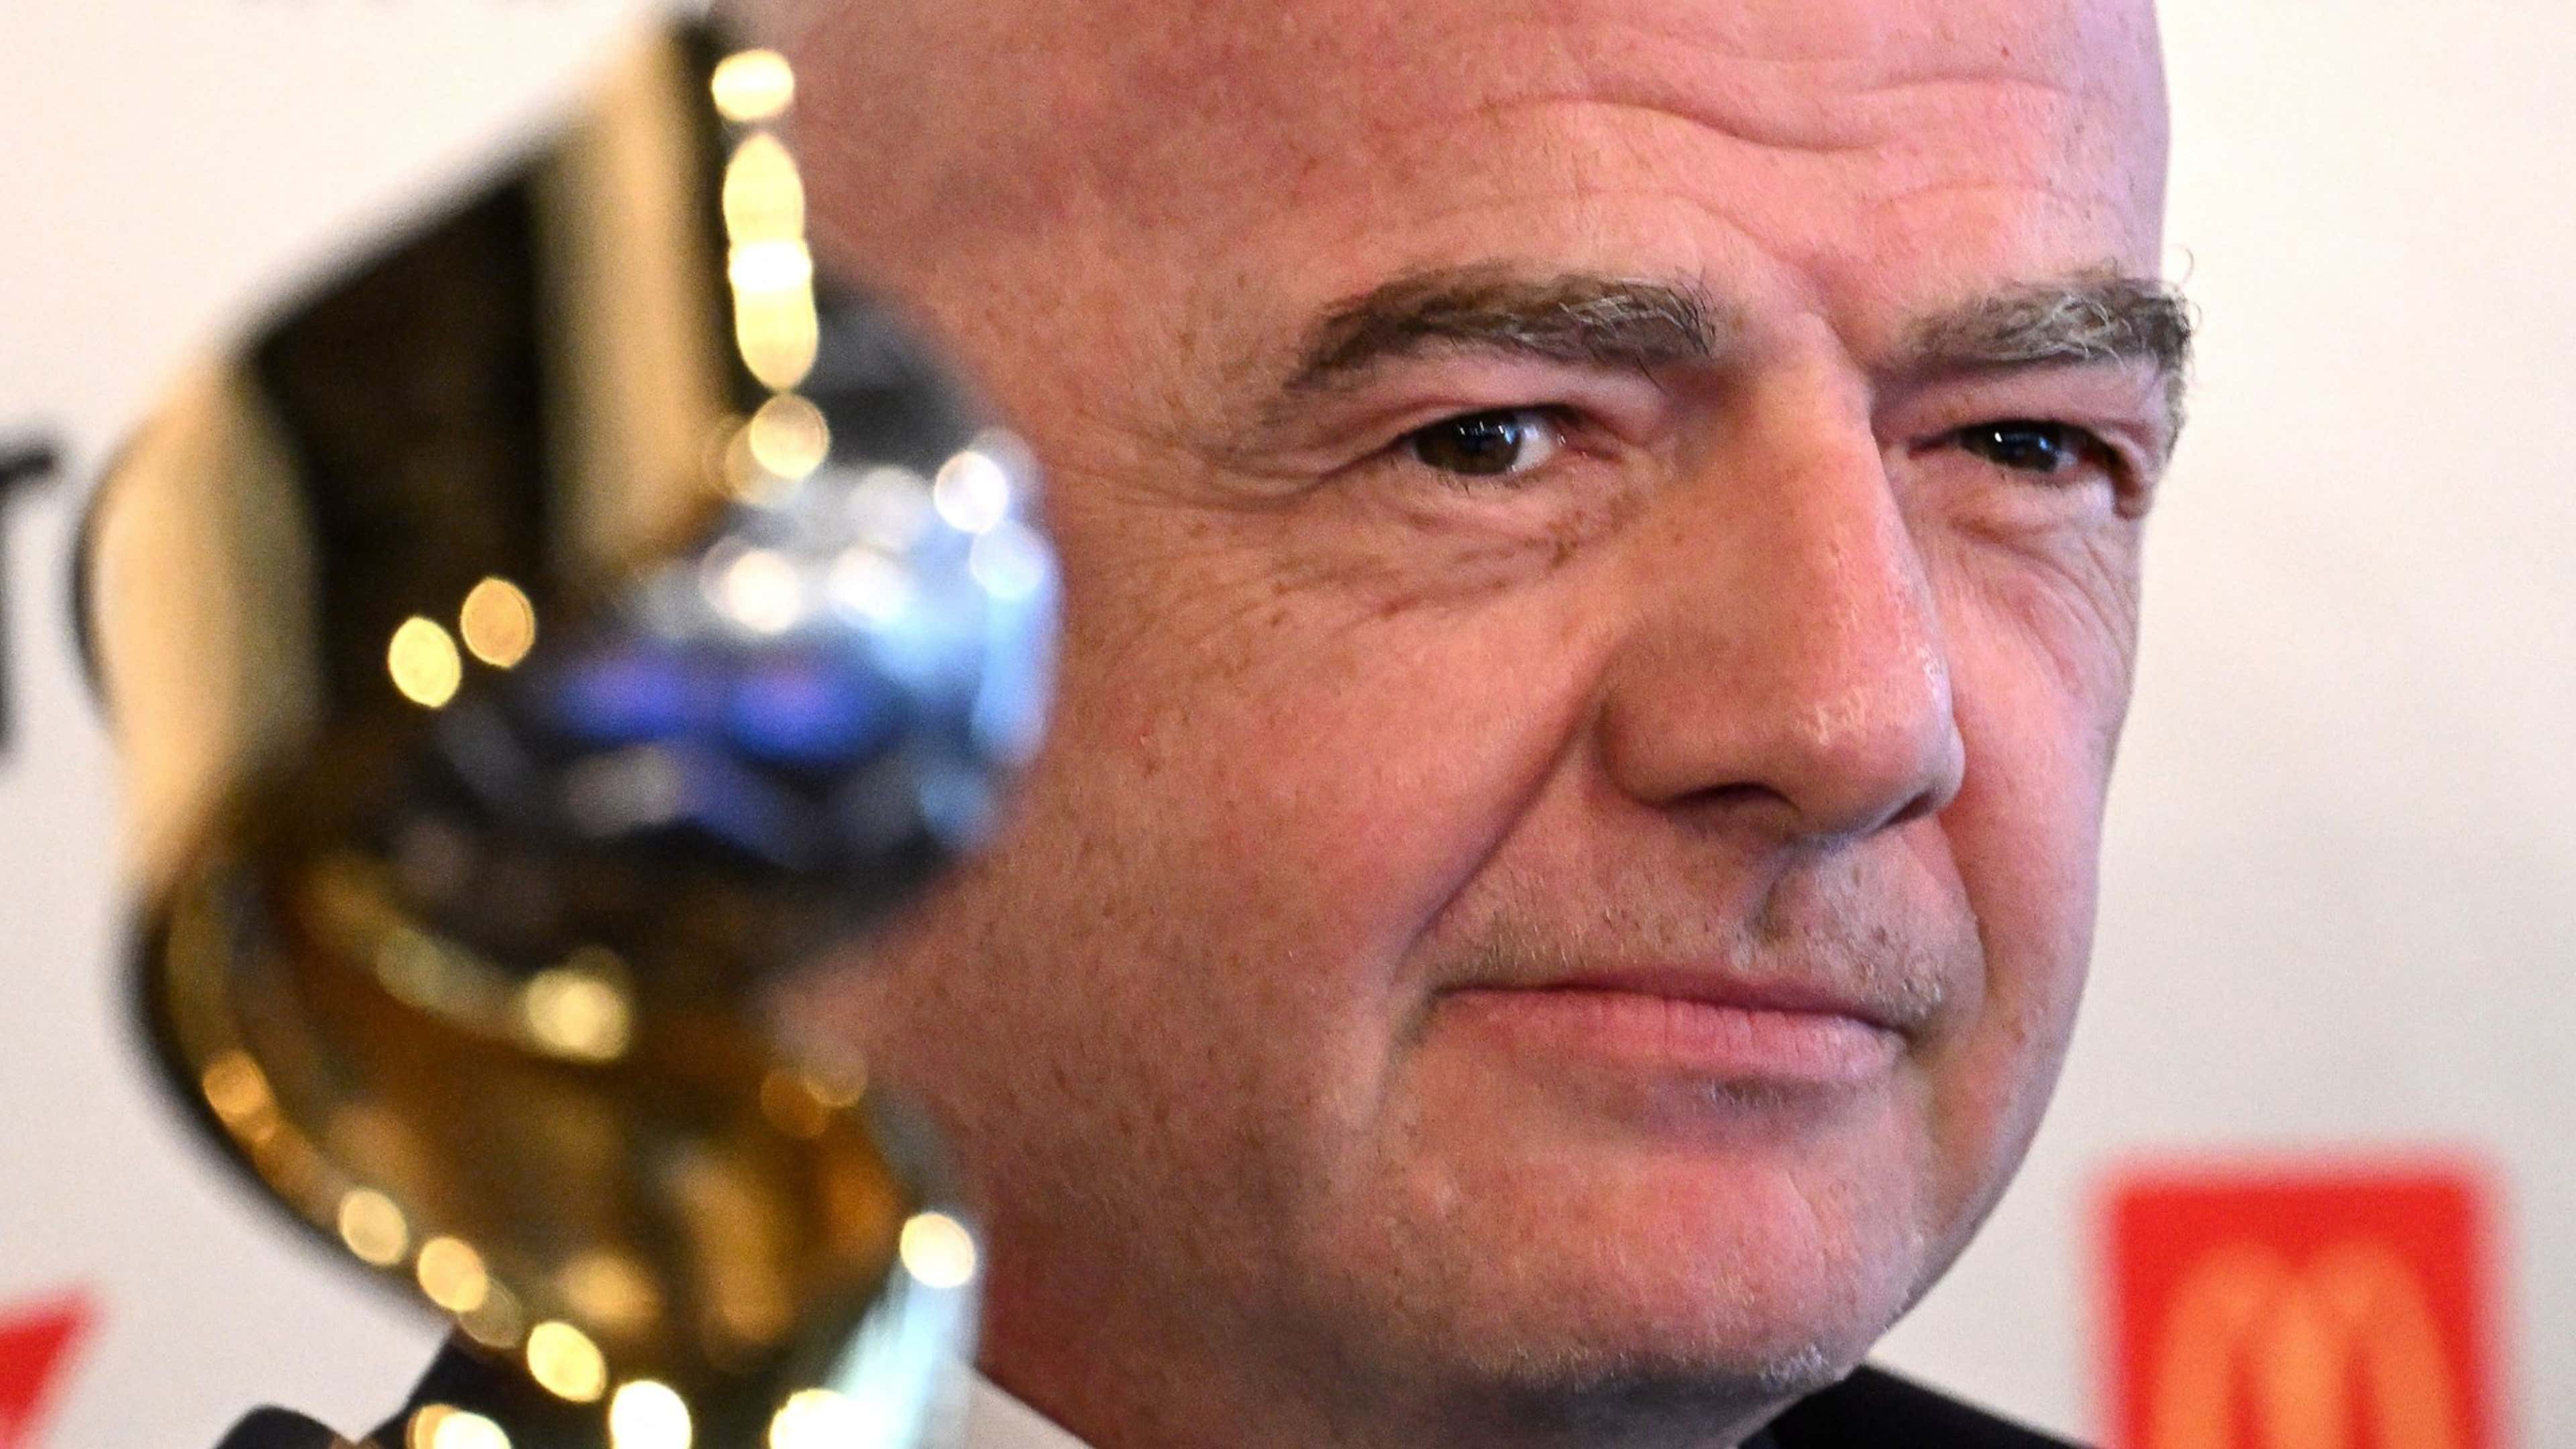 Infantino: Real Madrid are the best in the world